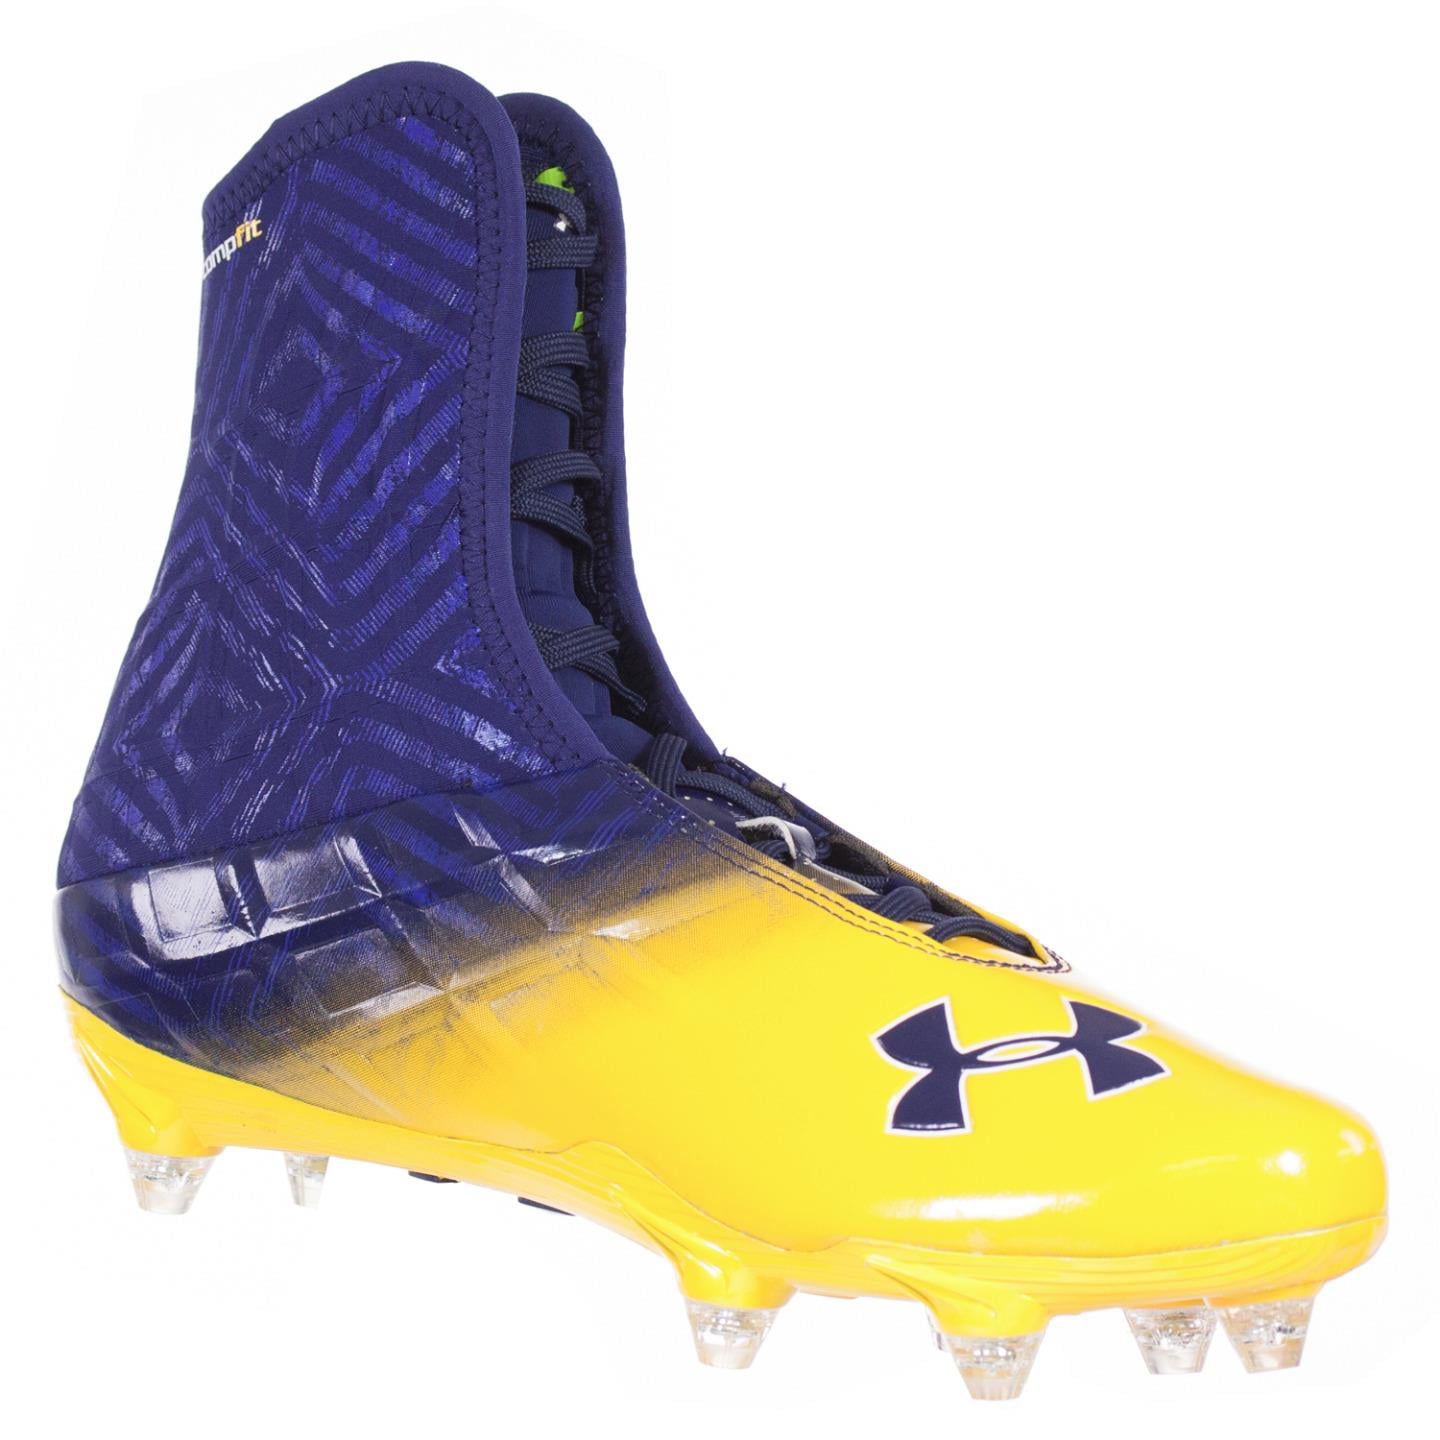 Under Armour Men's Football Cleats 